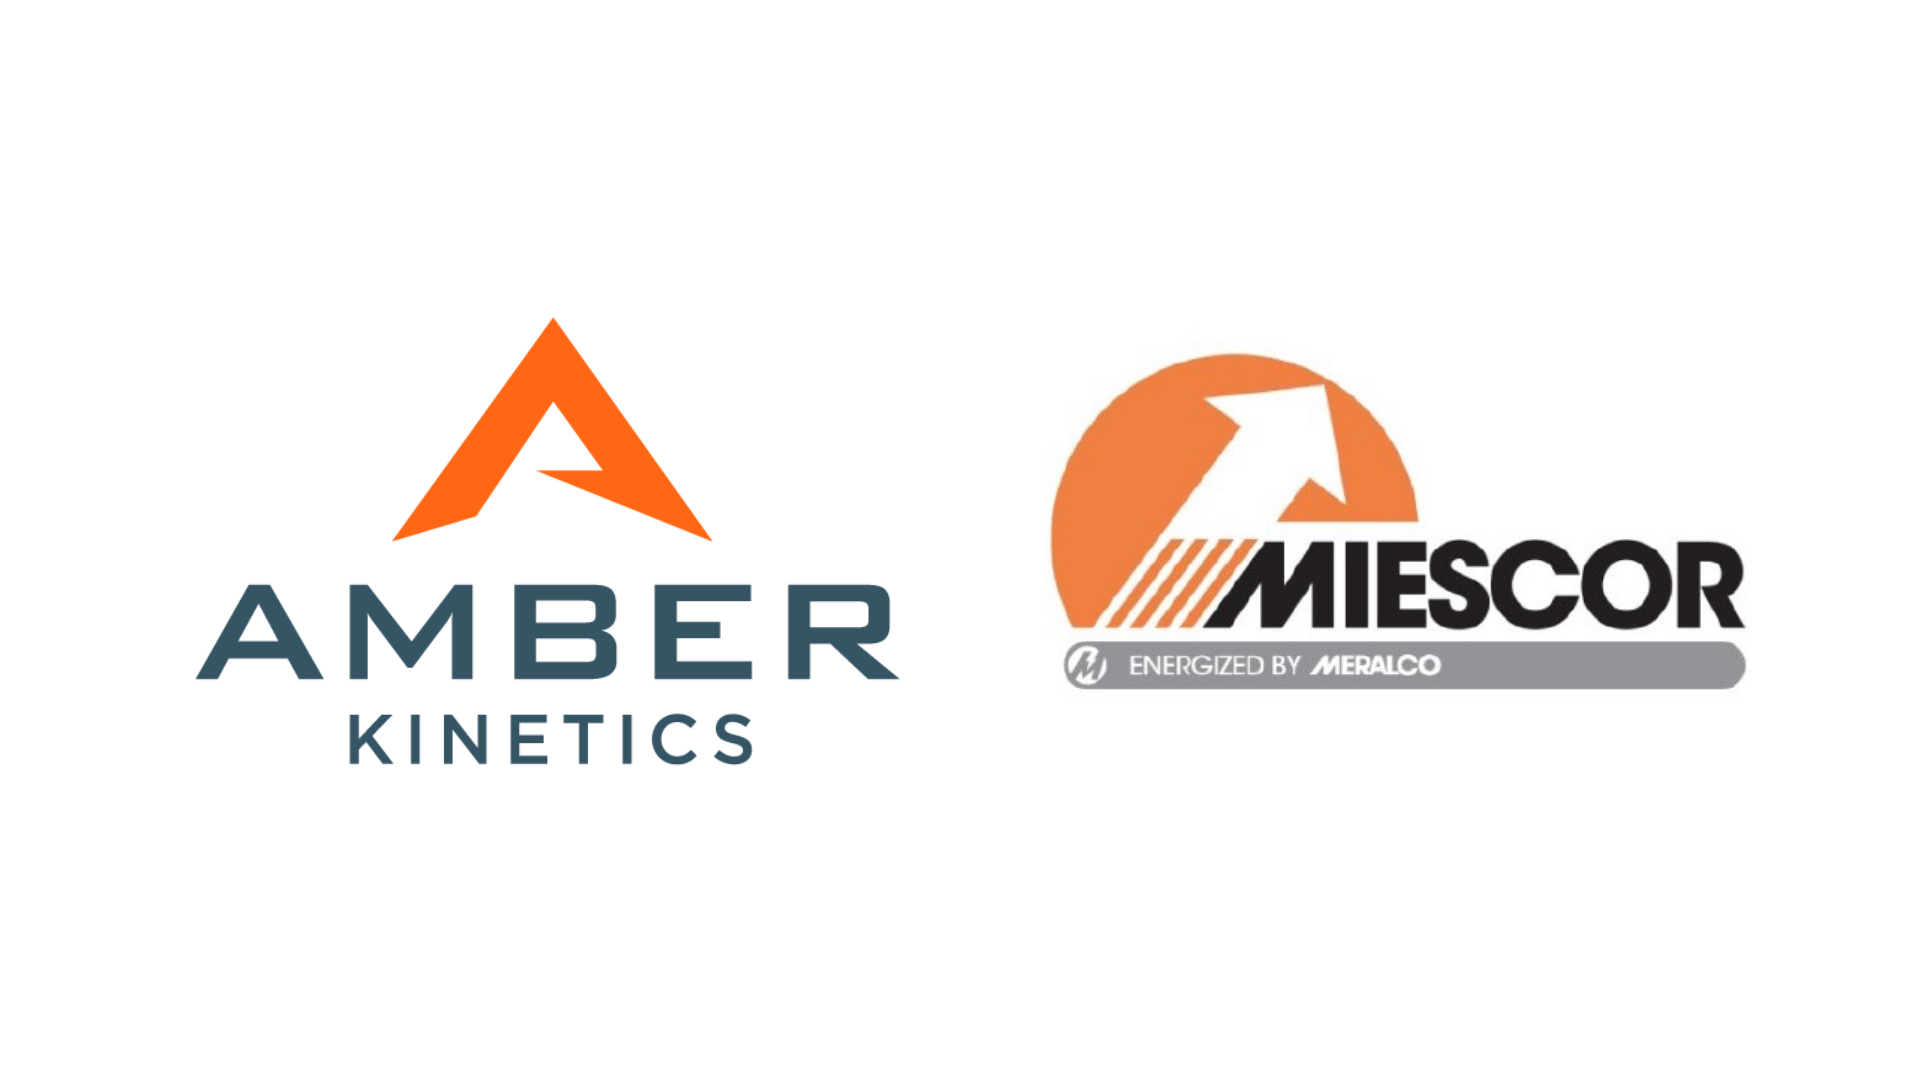 MIESCOR secures EPC contract to set up testing area for Amber Kinetics flywheel energy storage systems